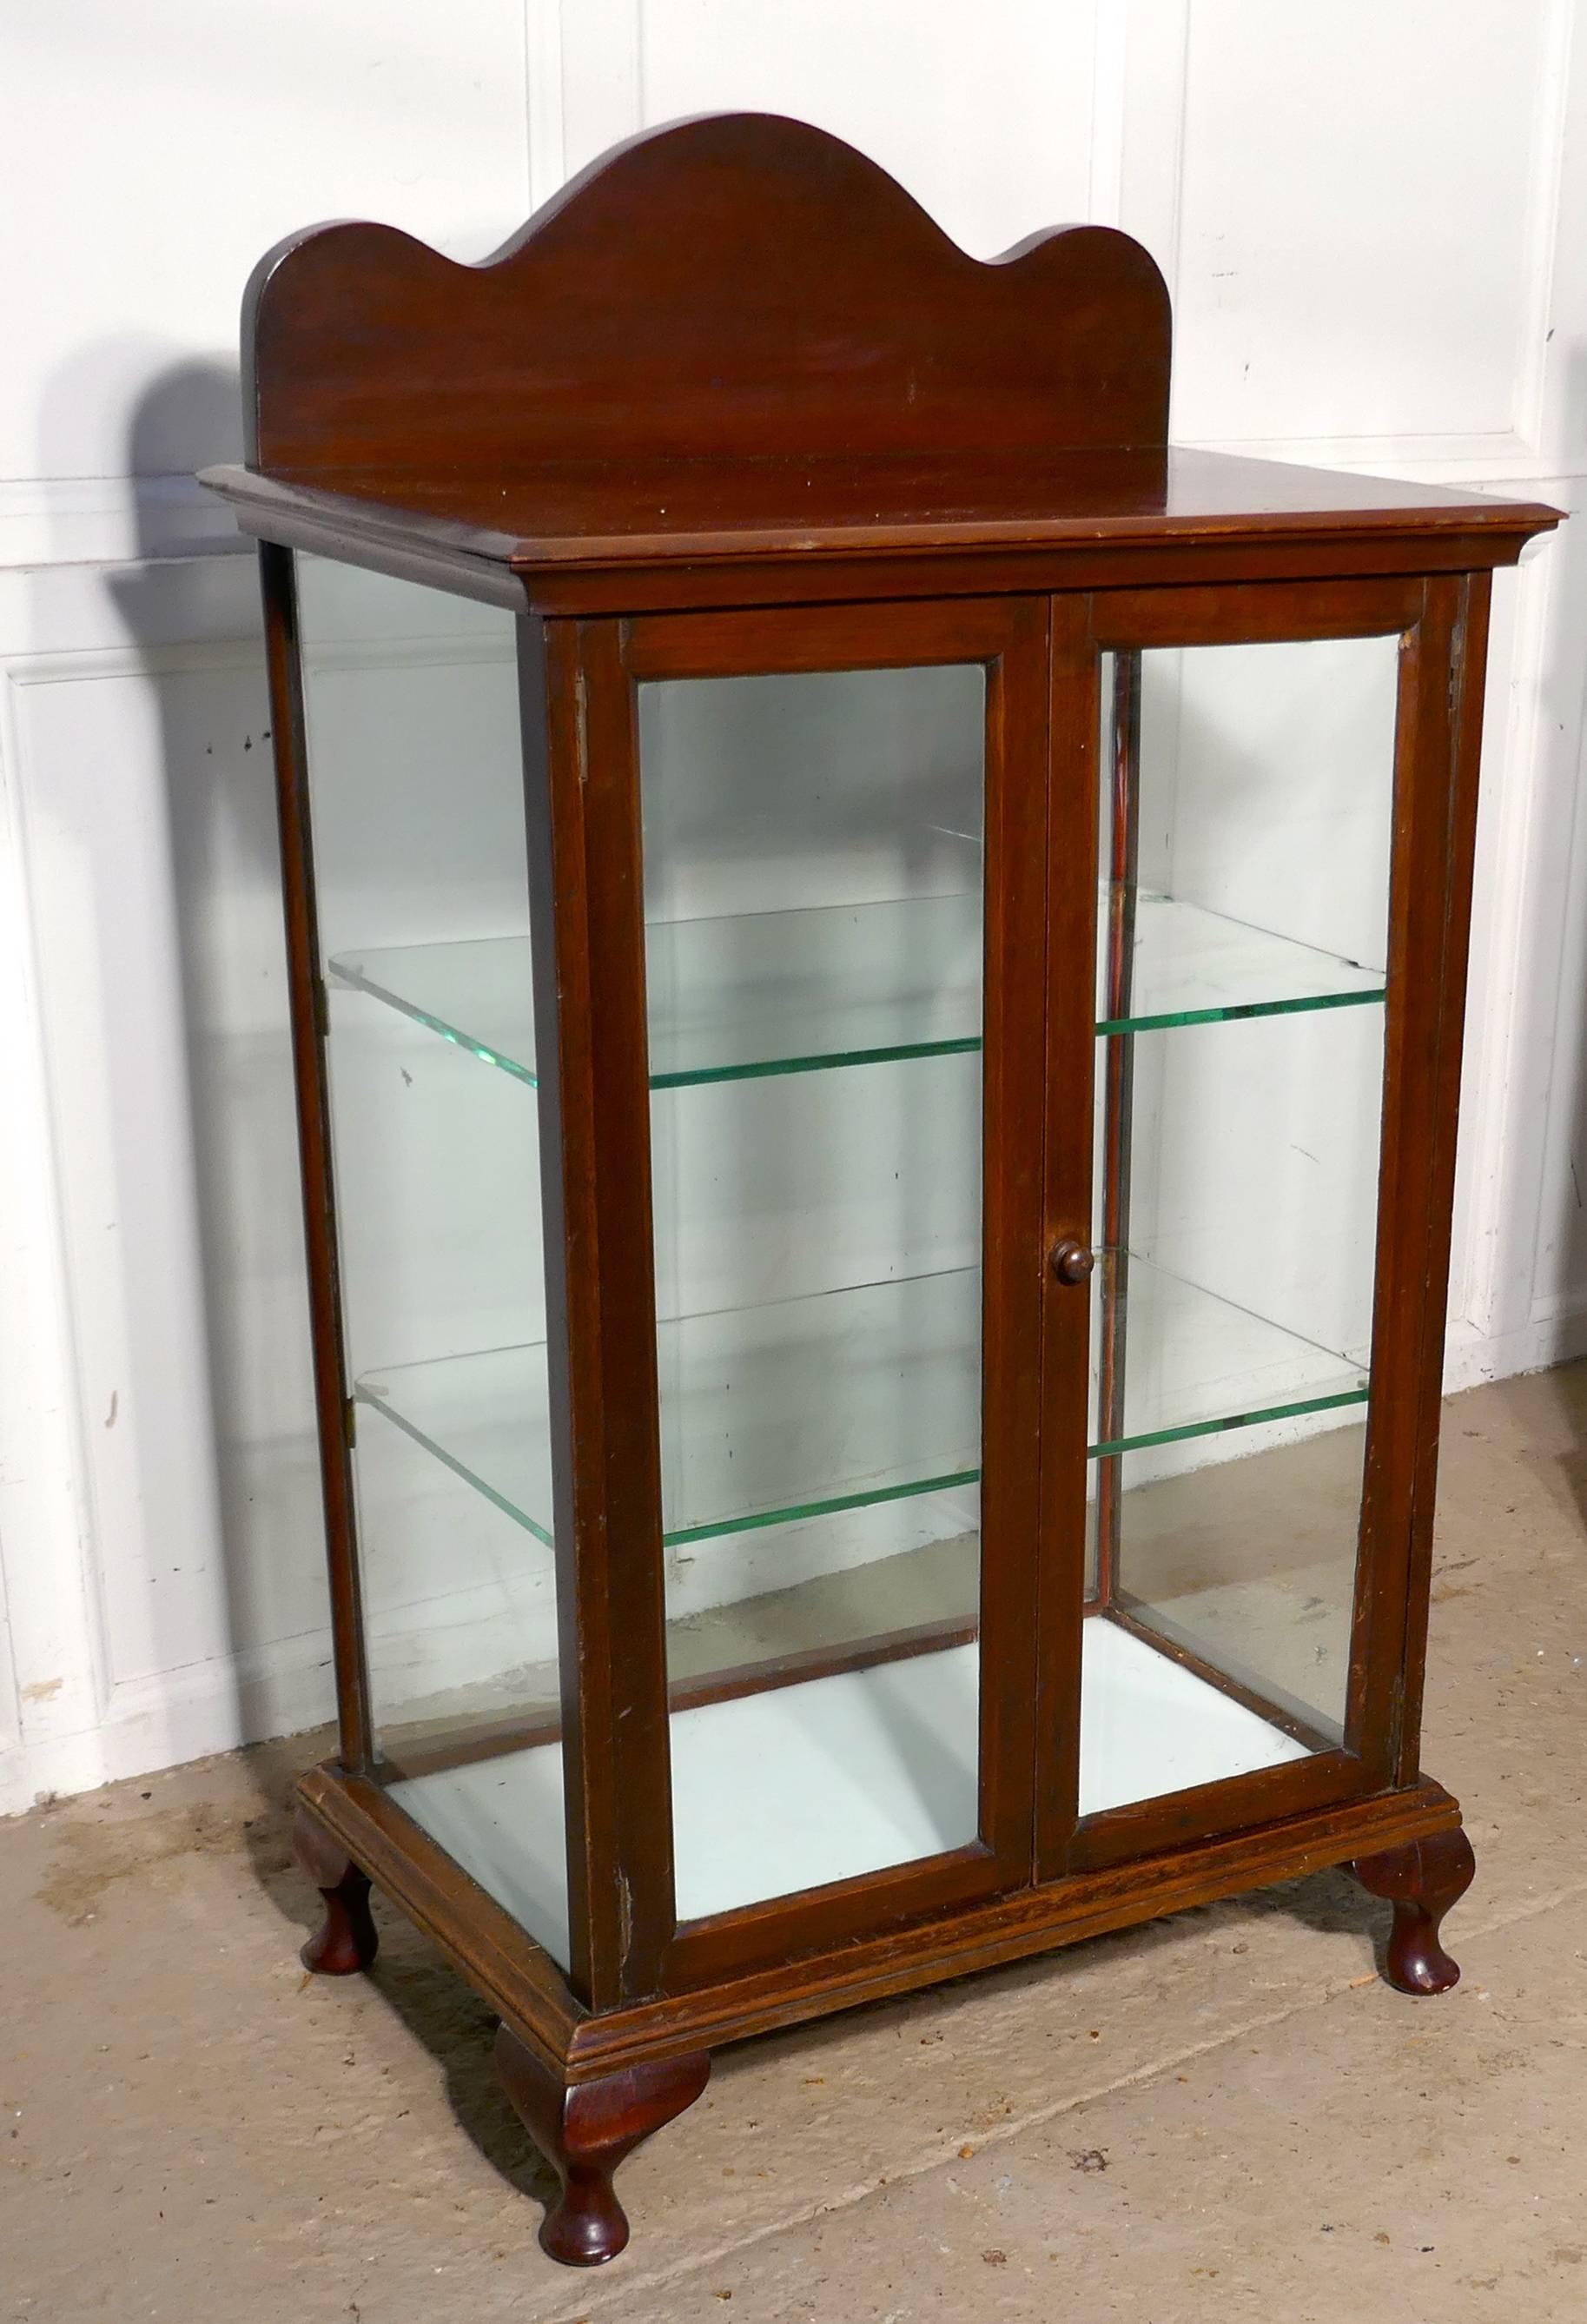 McVitie & Price cake shop display cabinet

This glazed advertising shop display cabinet is made in mahogany, the cabinet has a rather grand curving gallery and is set on little Cabriole feet. The gallery is inset with a mirrored sign of gold